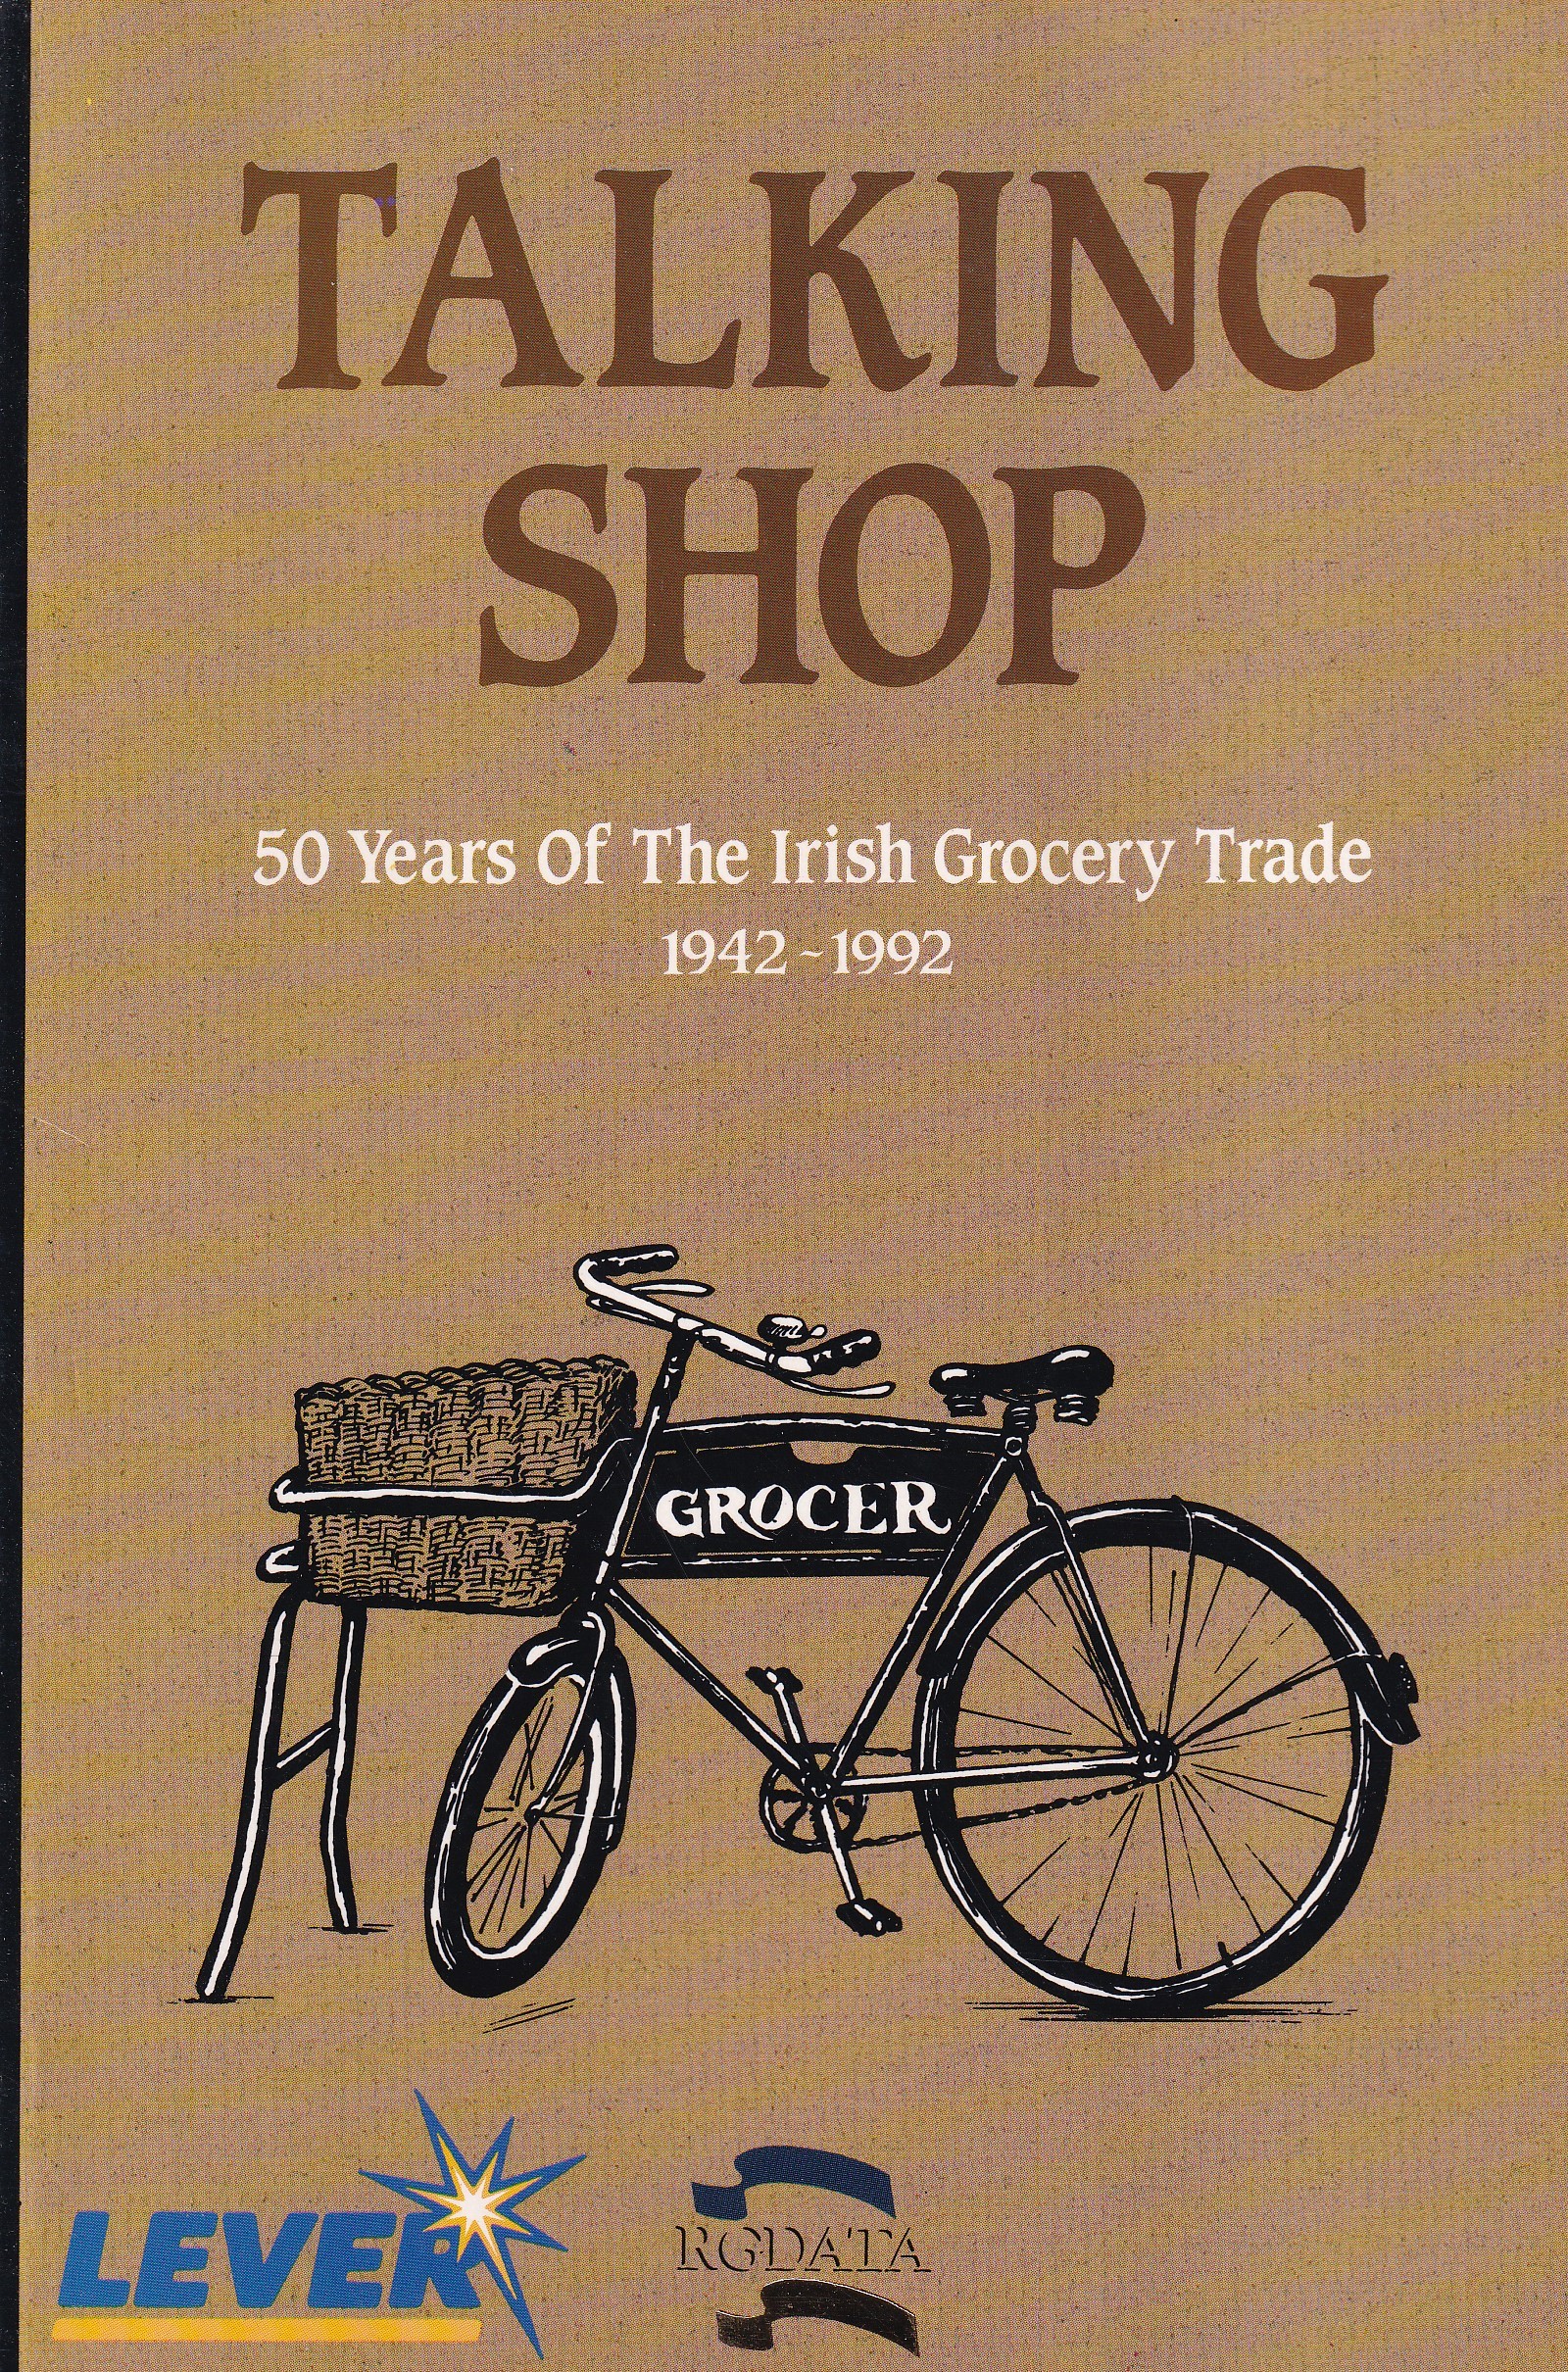 Talking Shop: 50 Years of the Irish Grocery Trade 1942-1992 | Shane Molloy | Charlie Byrne's